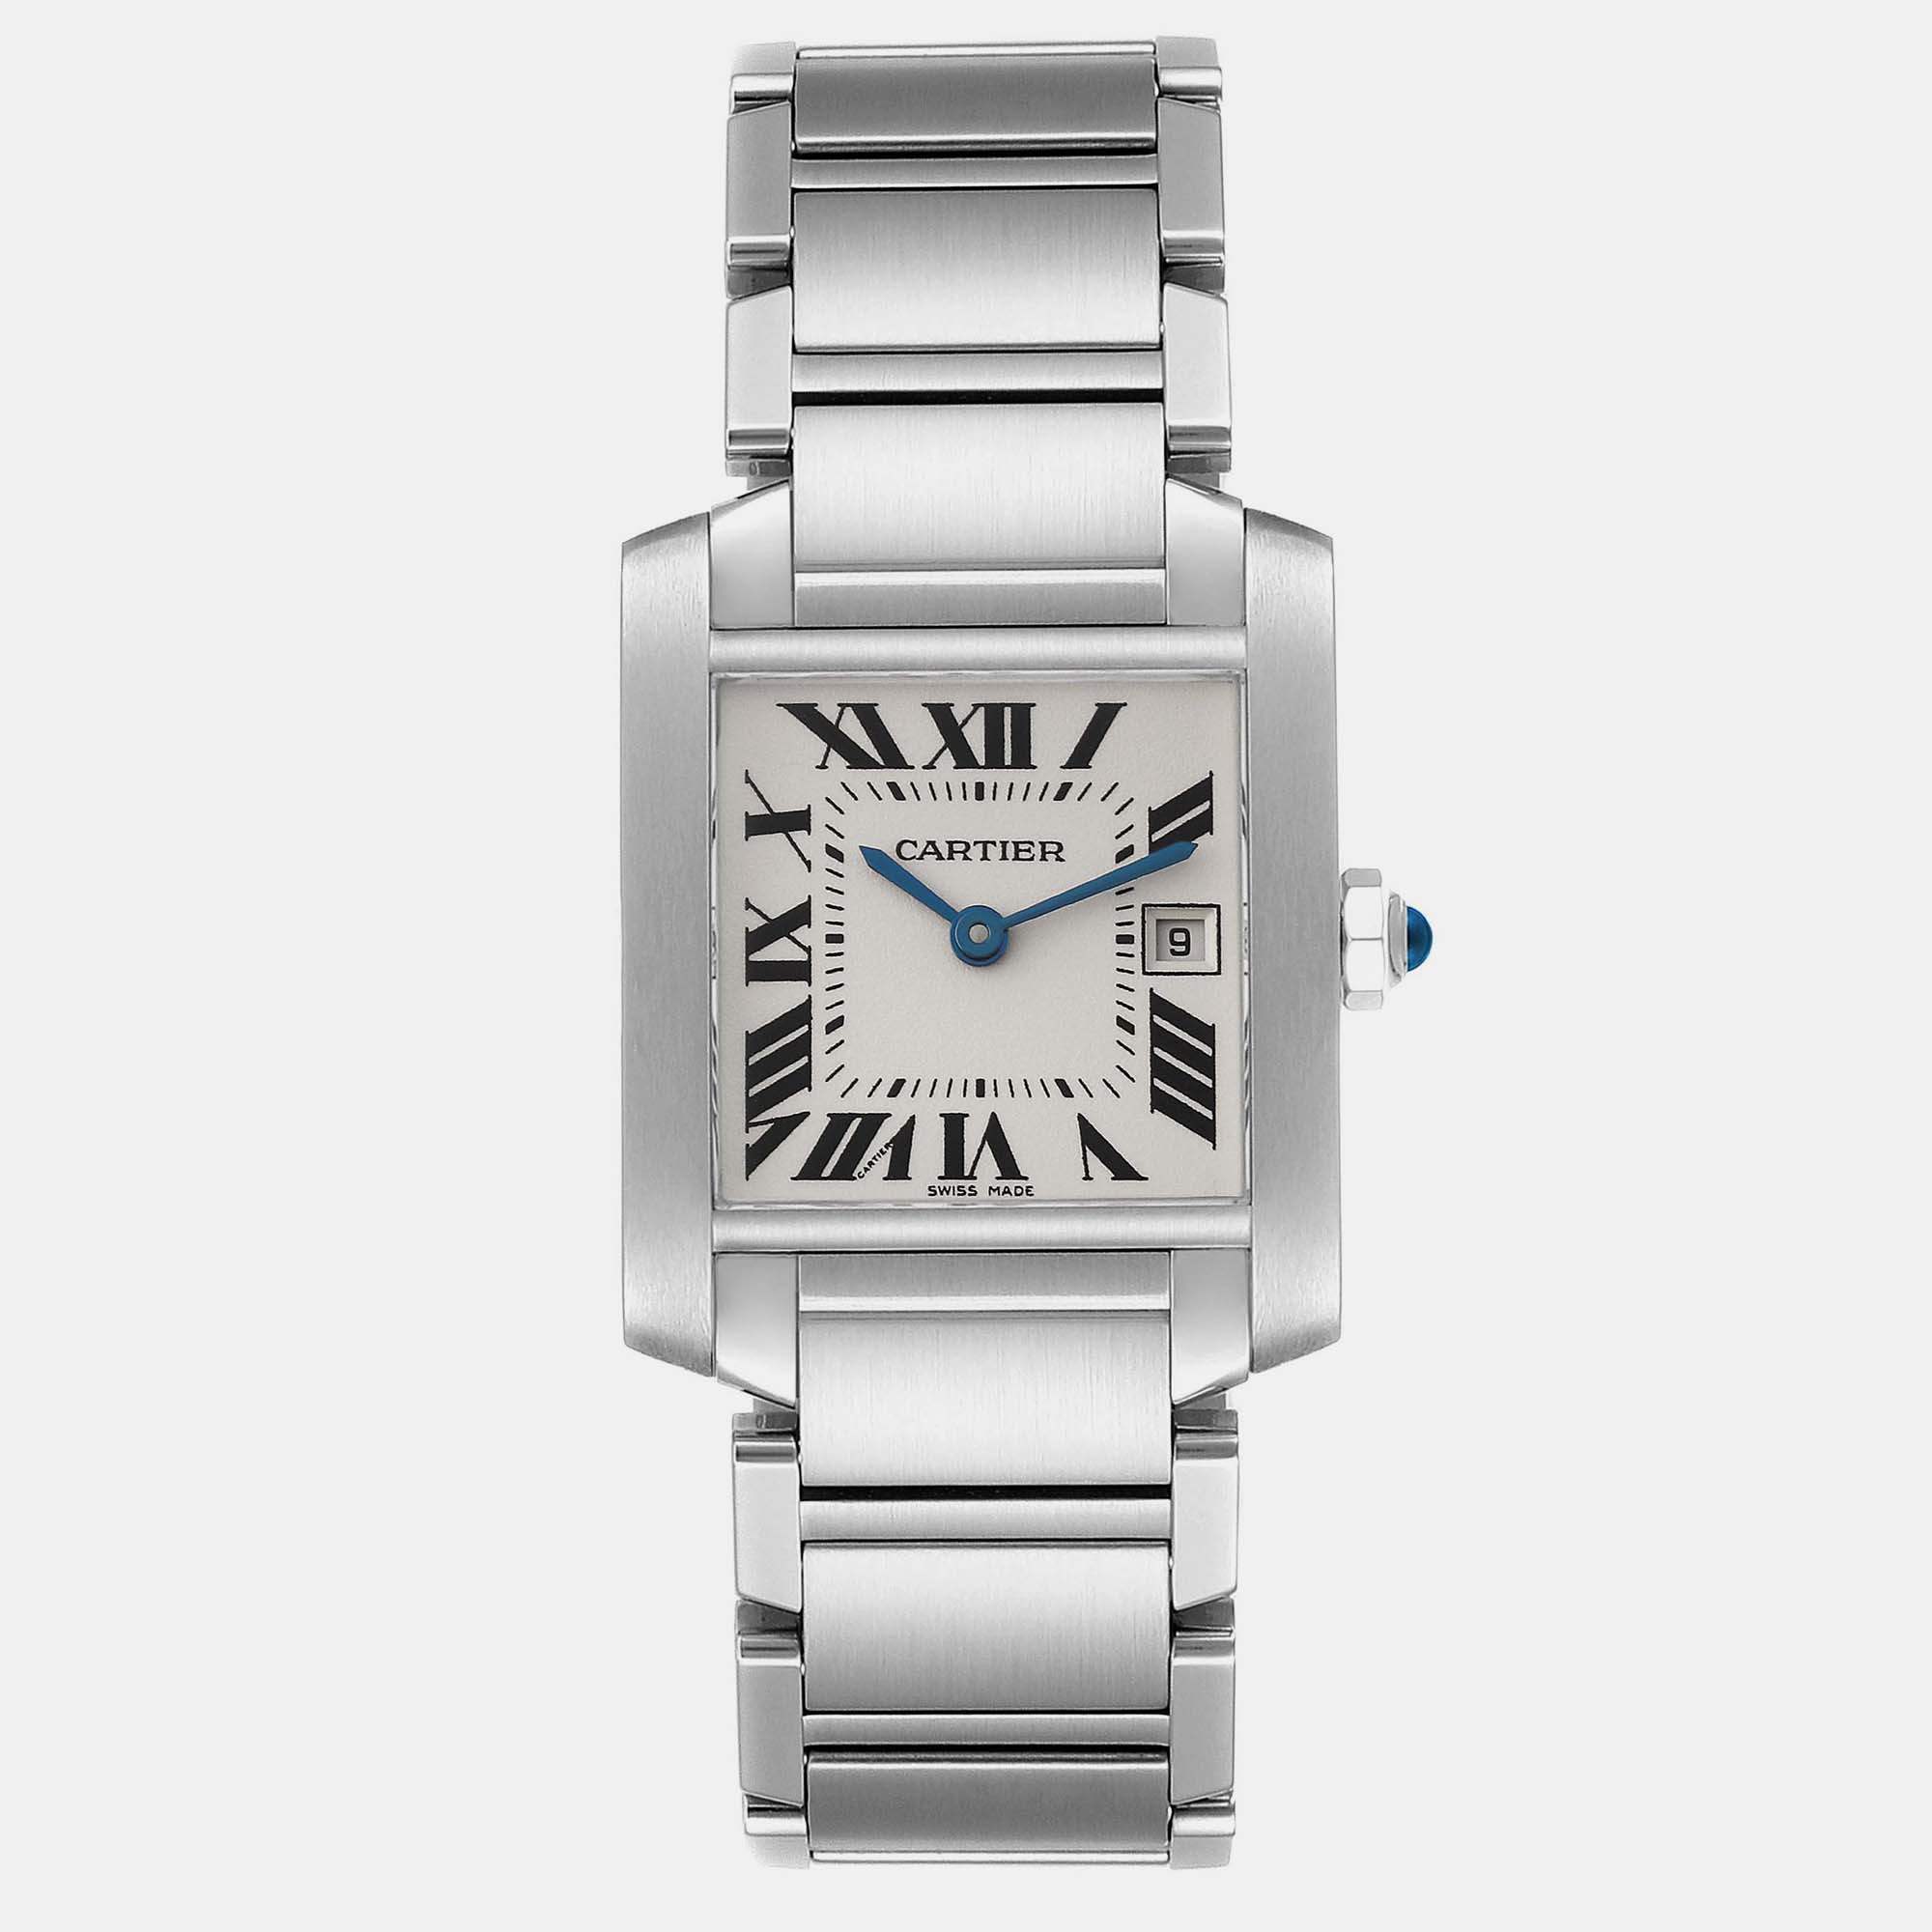 Pre-owned Cartier Tank Francaise Midsize Silver Dial Steel Ladies Watch W51011q3 25.0 Mm X 30.0 Mm